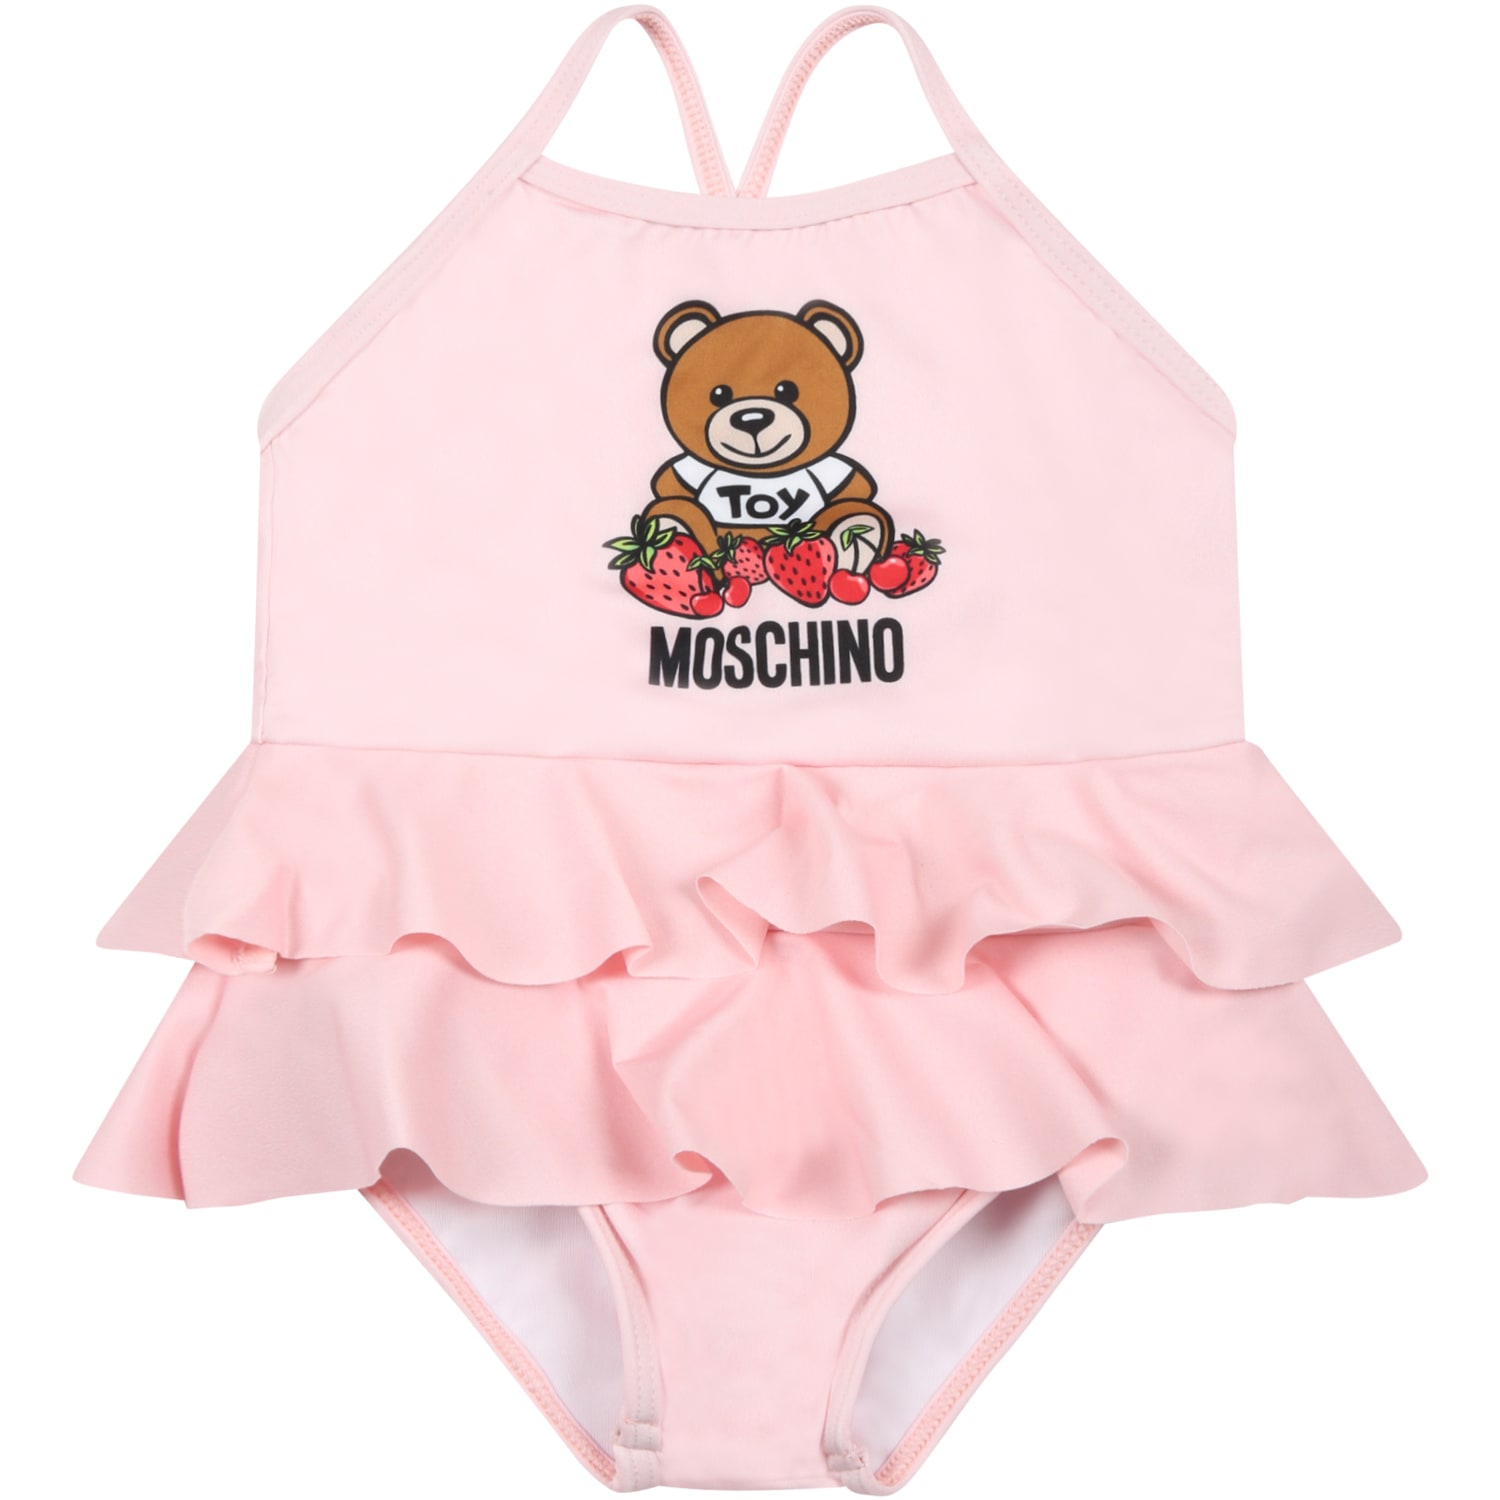 Moschino Pink Swimsuit For Baby Girl With Teddy Bear